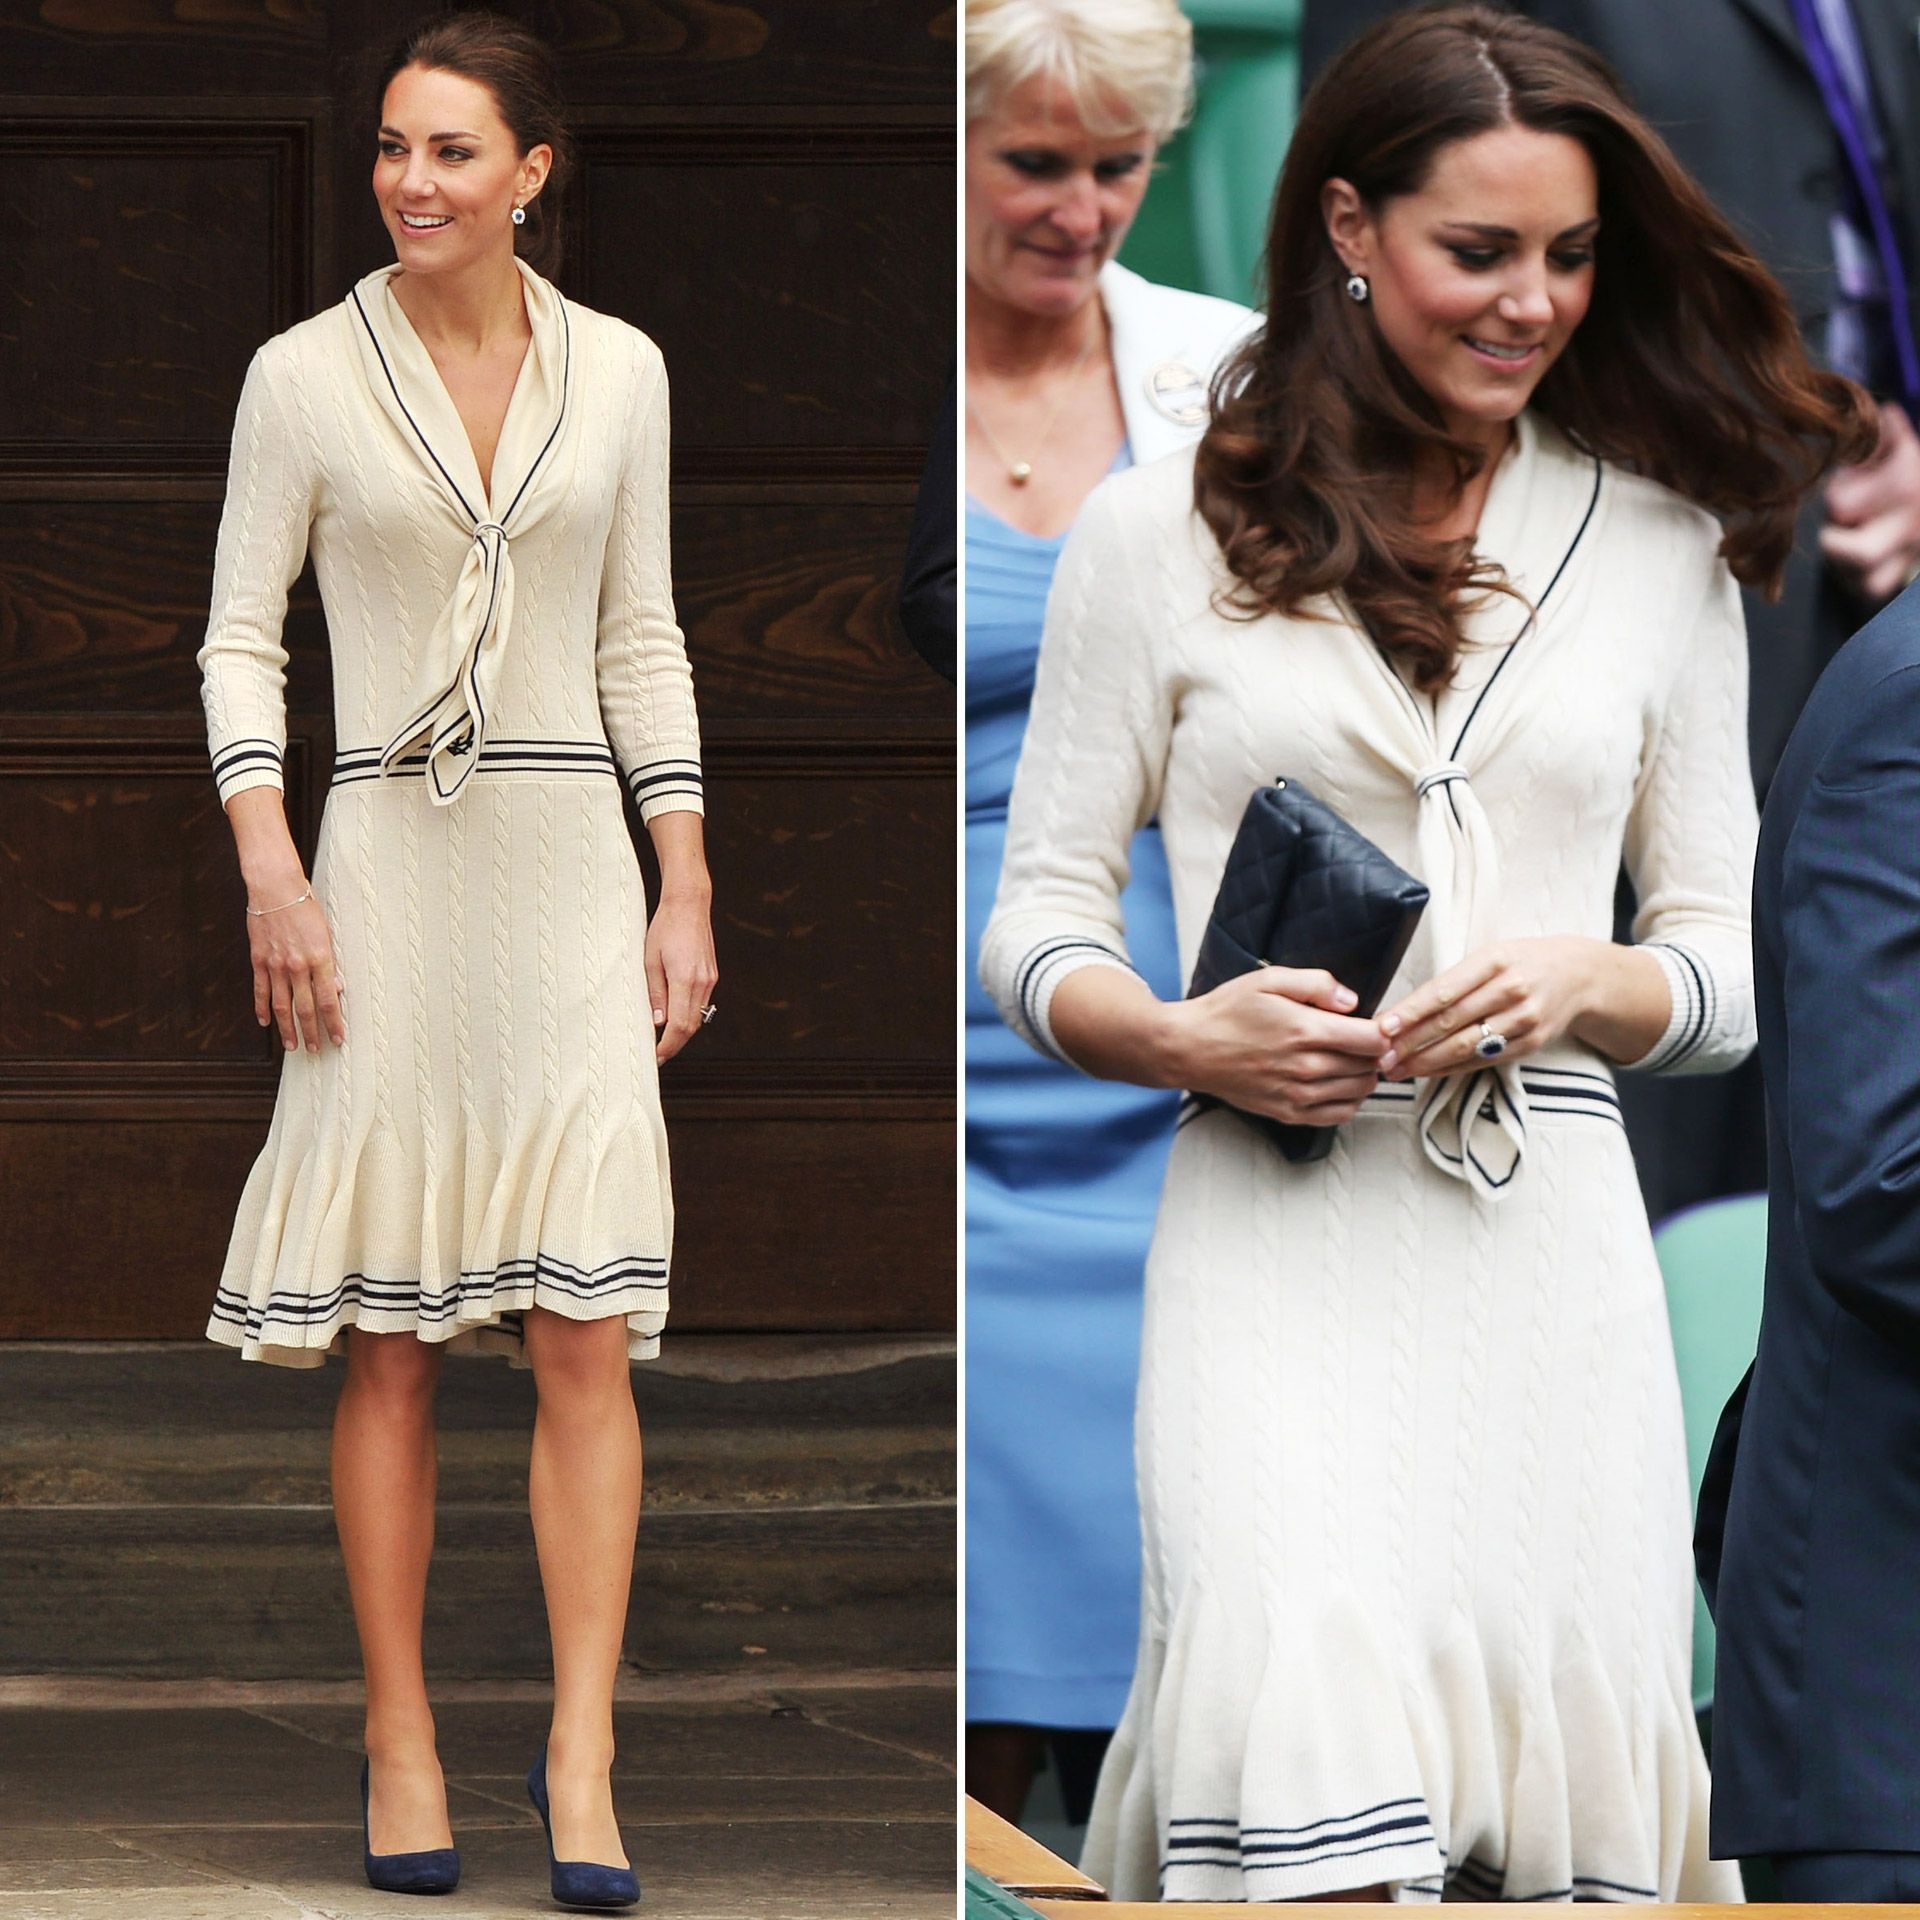 548a010c90903_-_rbk-kate-middleton-outfits-12-s2.jpg